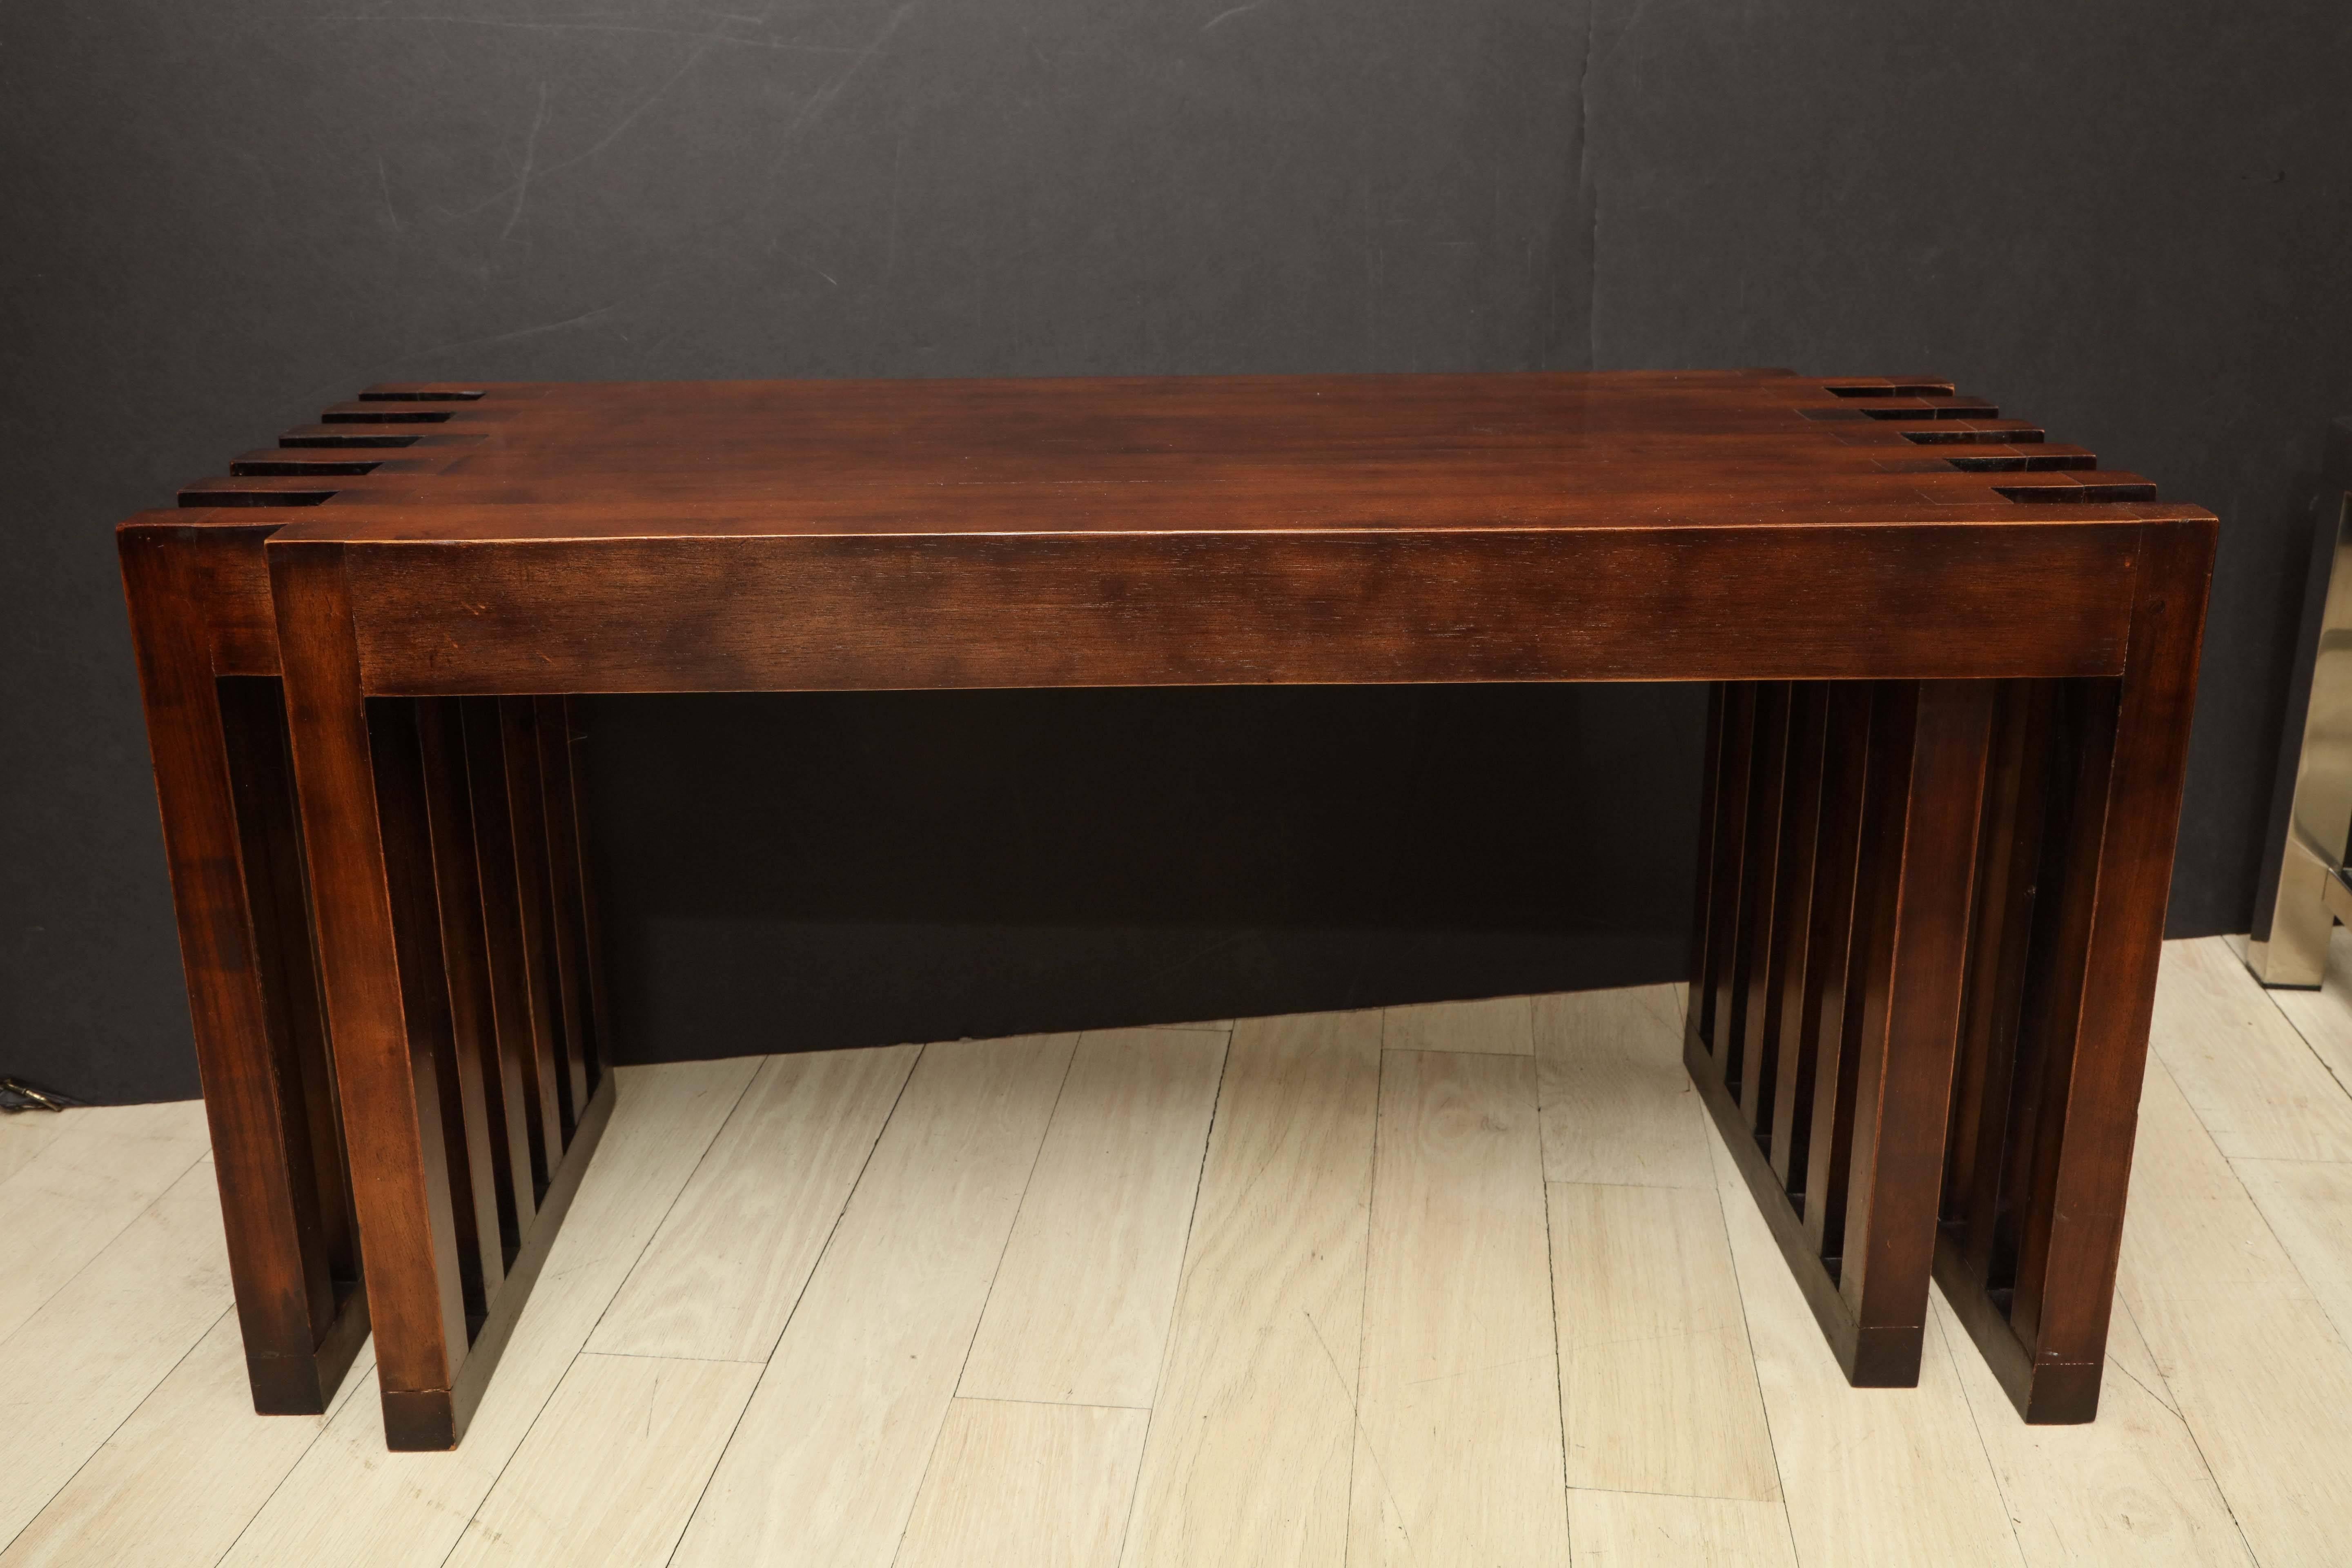 Pair of mahogany benches with double slatted side supports. Solid, sturdy benches that could also be used as two small wood tables.

Dimensions:
 36